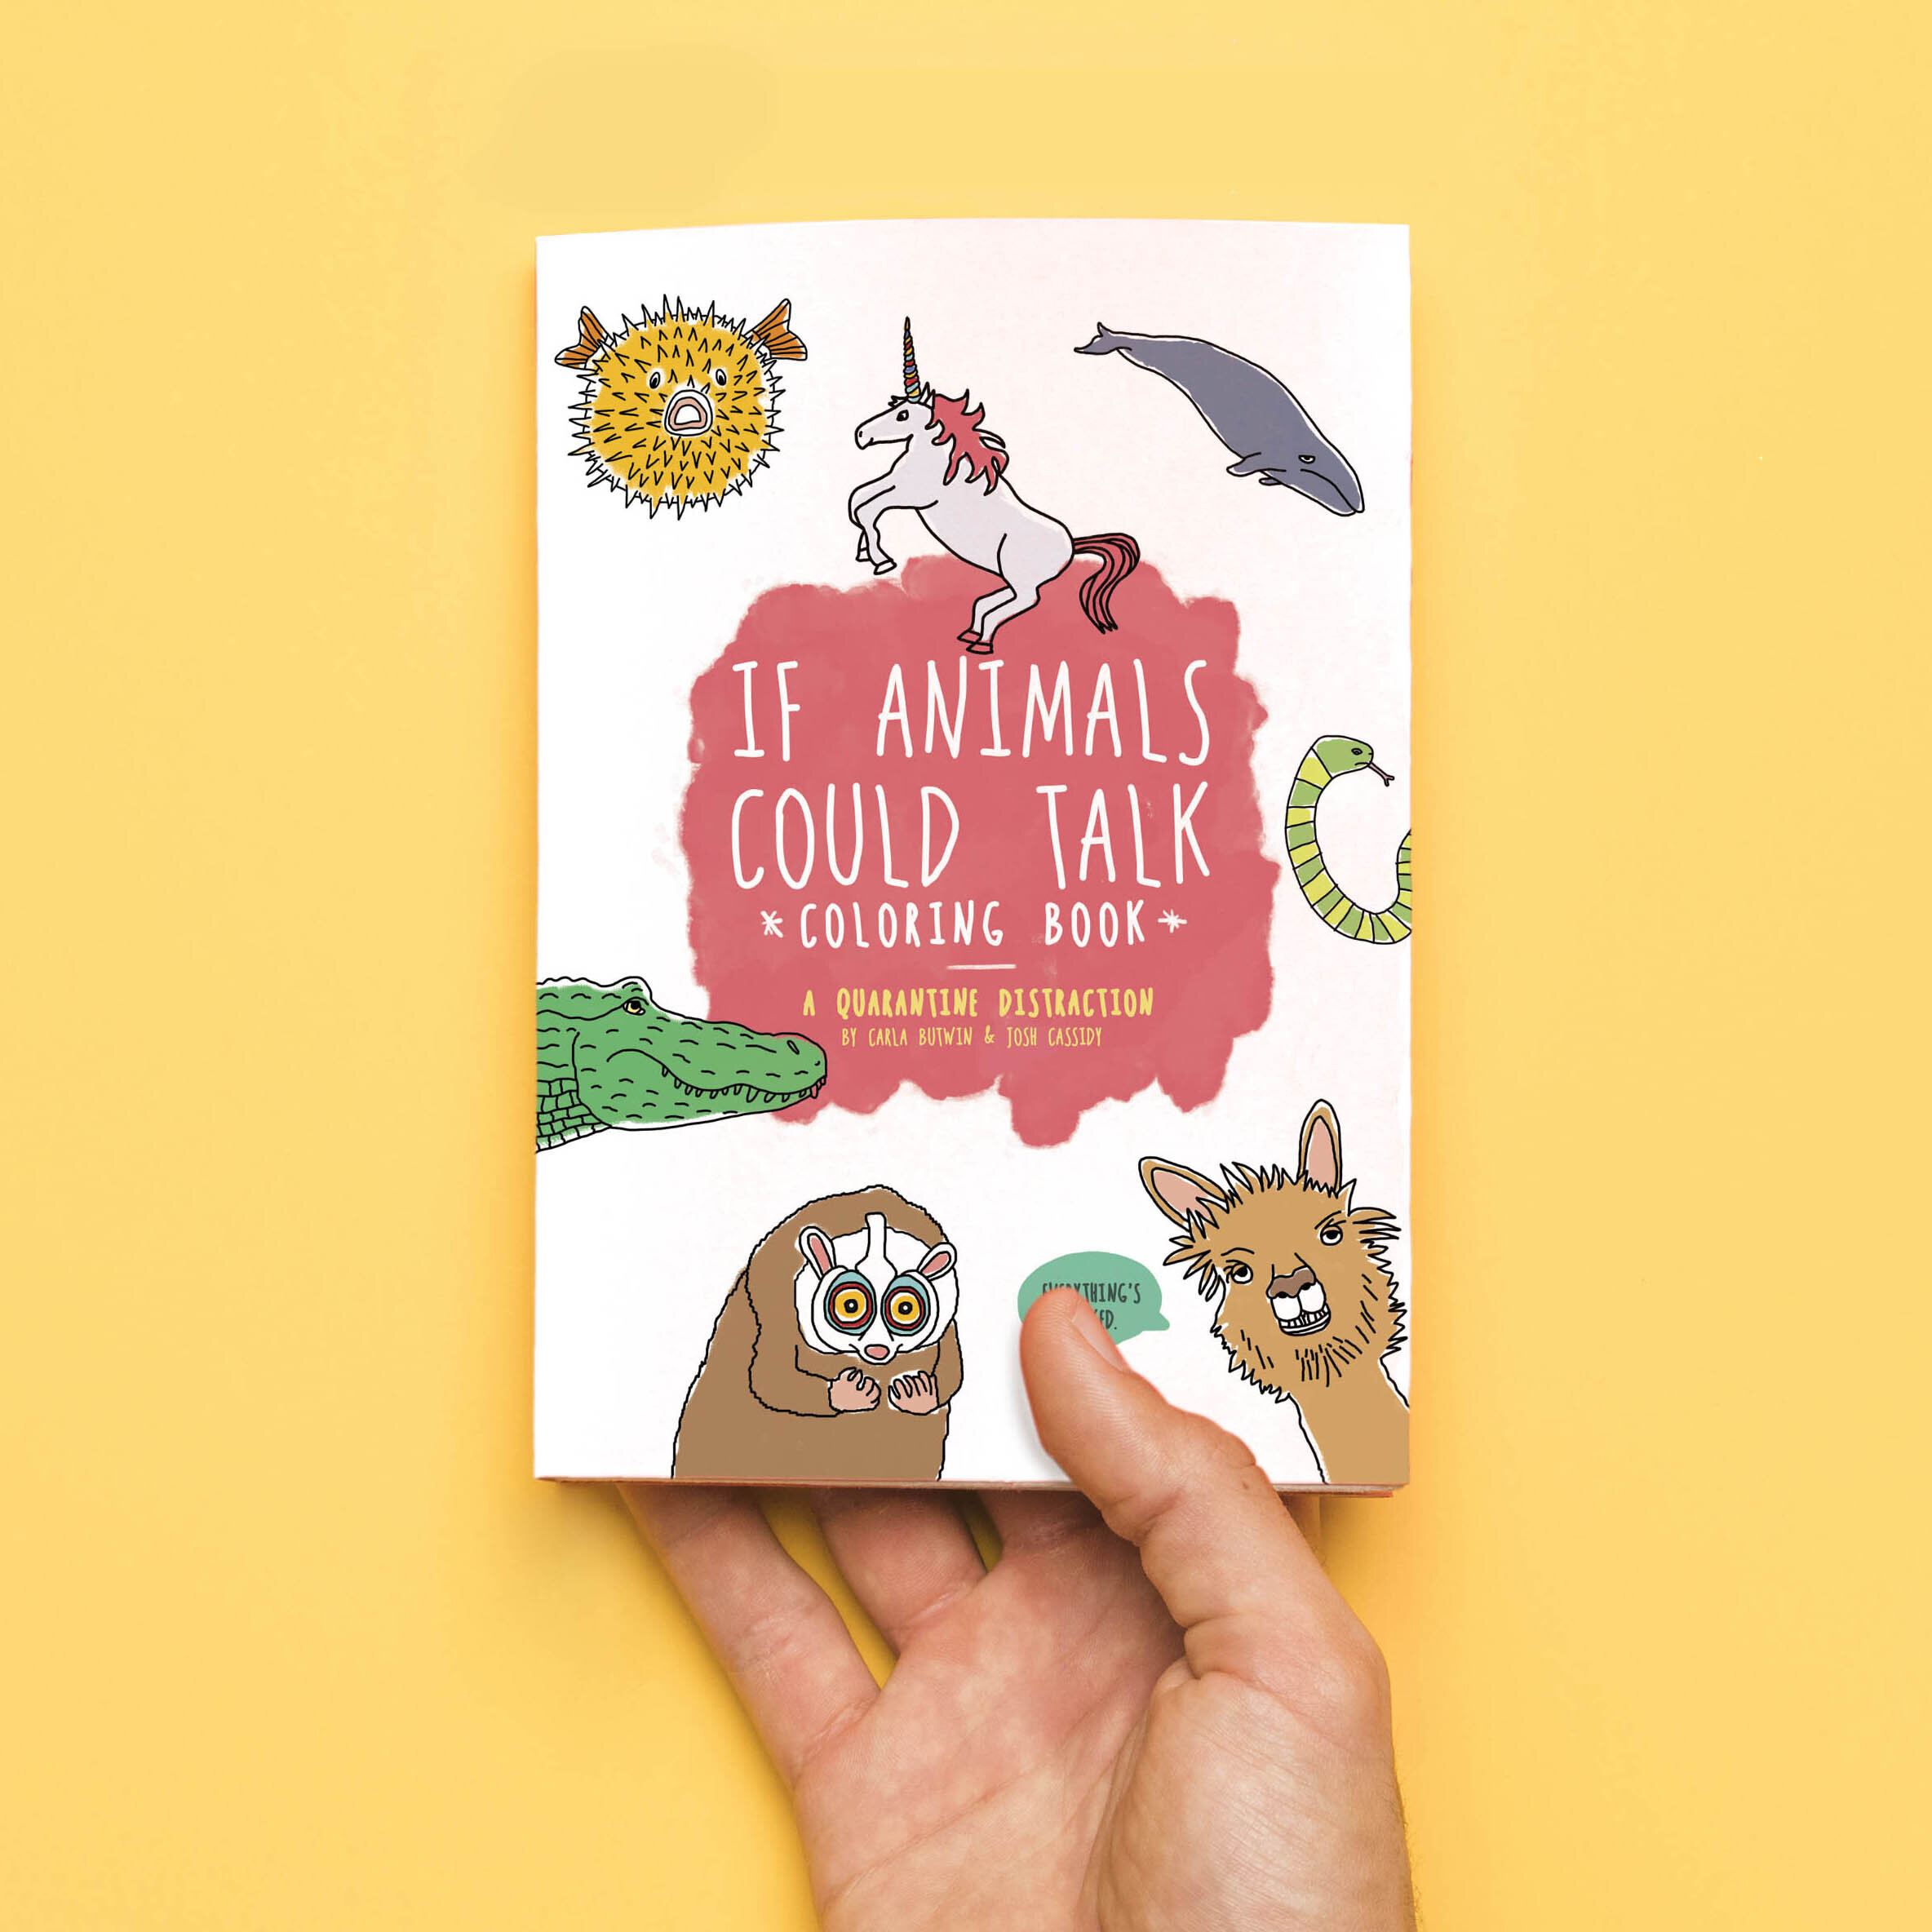 IF ANIMALS COULD TALK — Carla Butwin